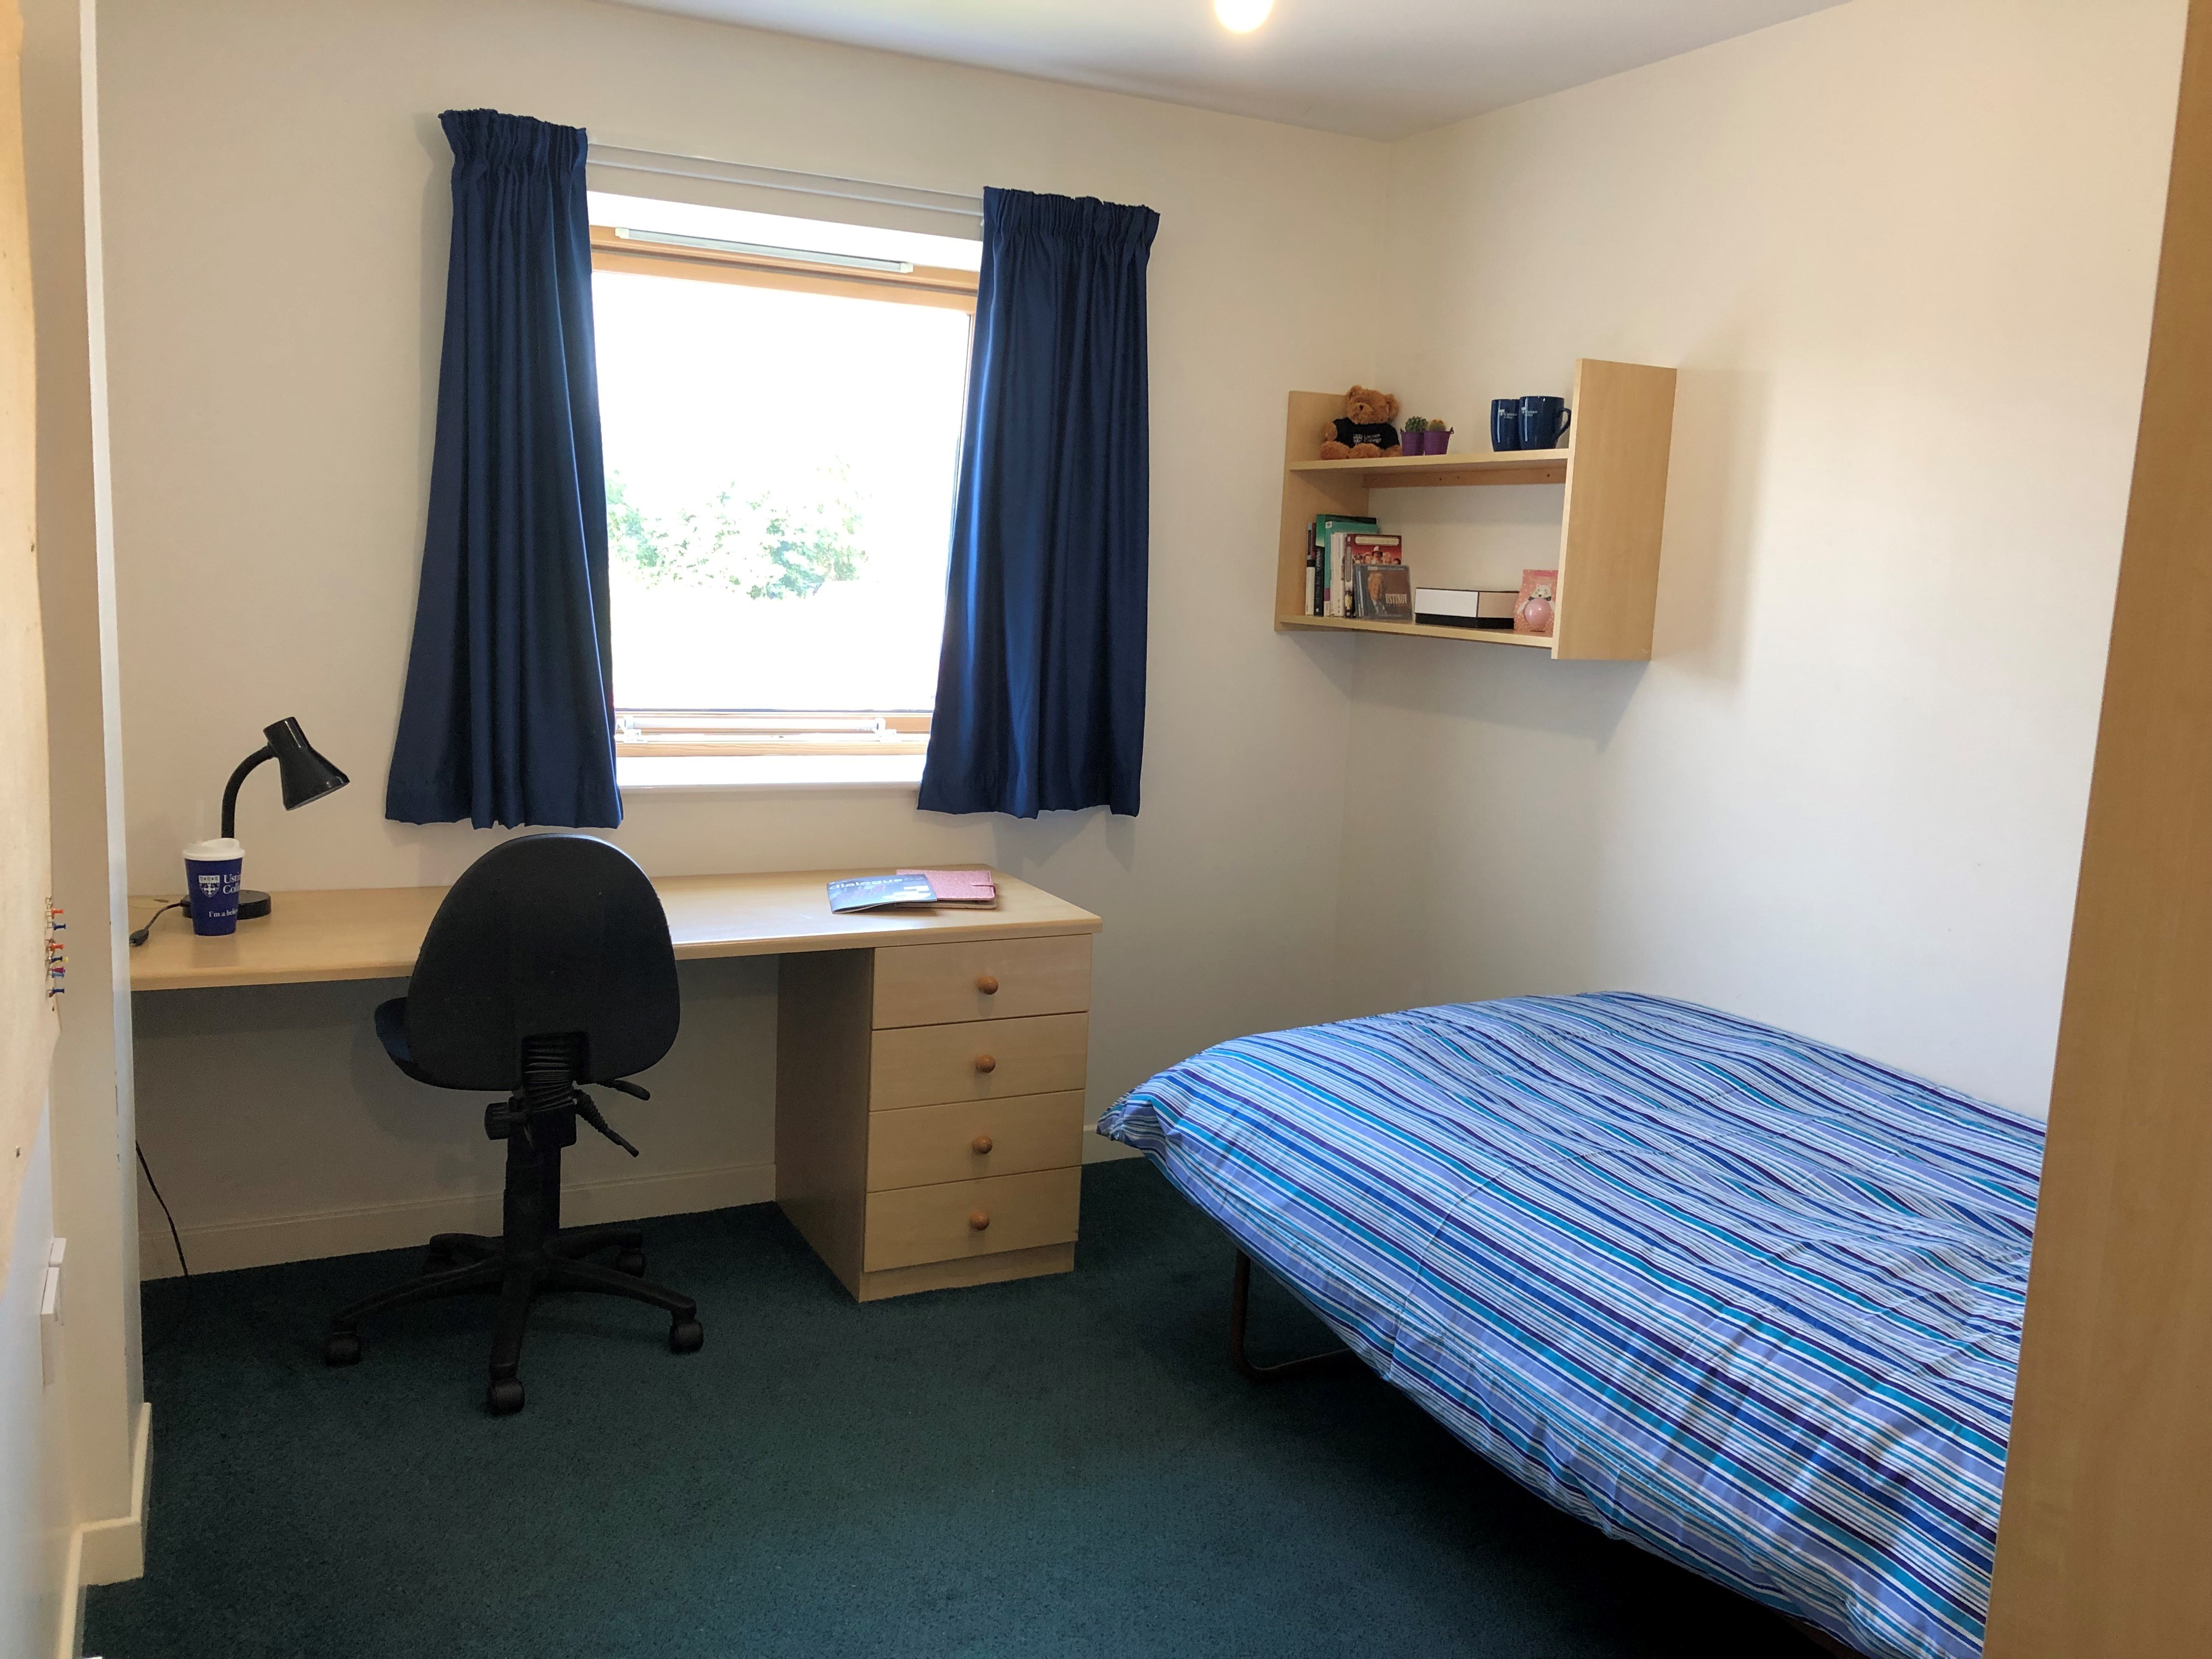 Brakenbury Bedroom with desk, desk chair, wall shelves and single bed